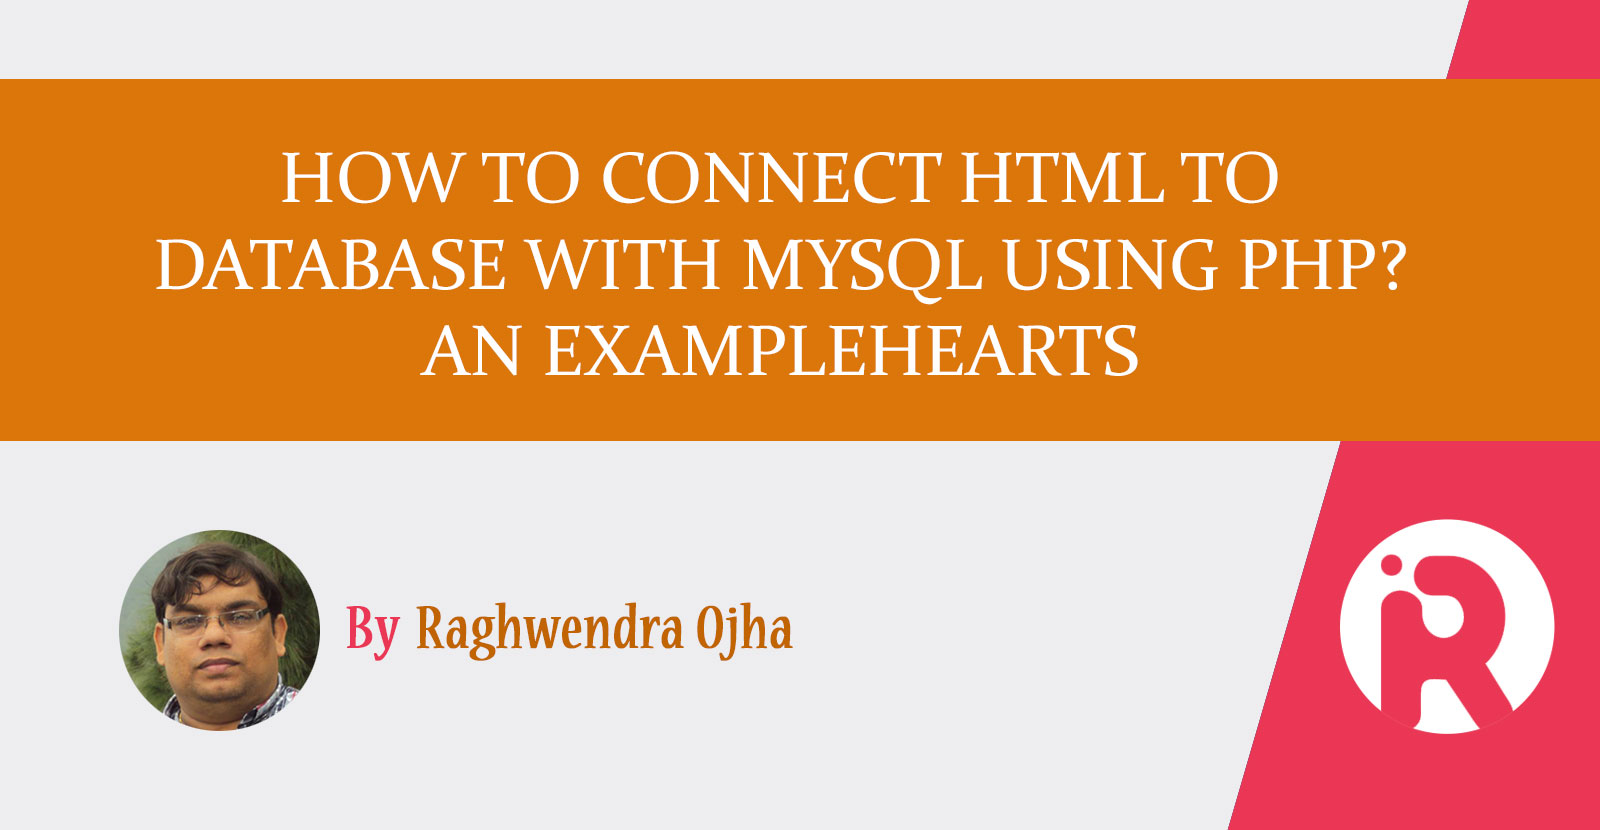 How to connect HTML to database with MySQL using PHP? An example